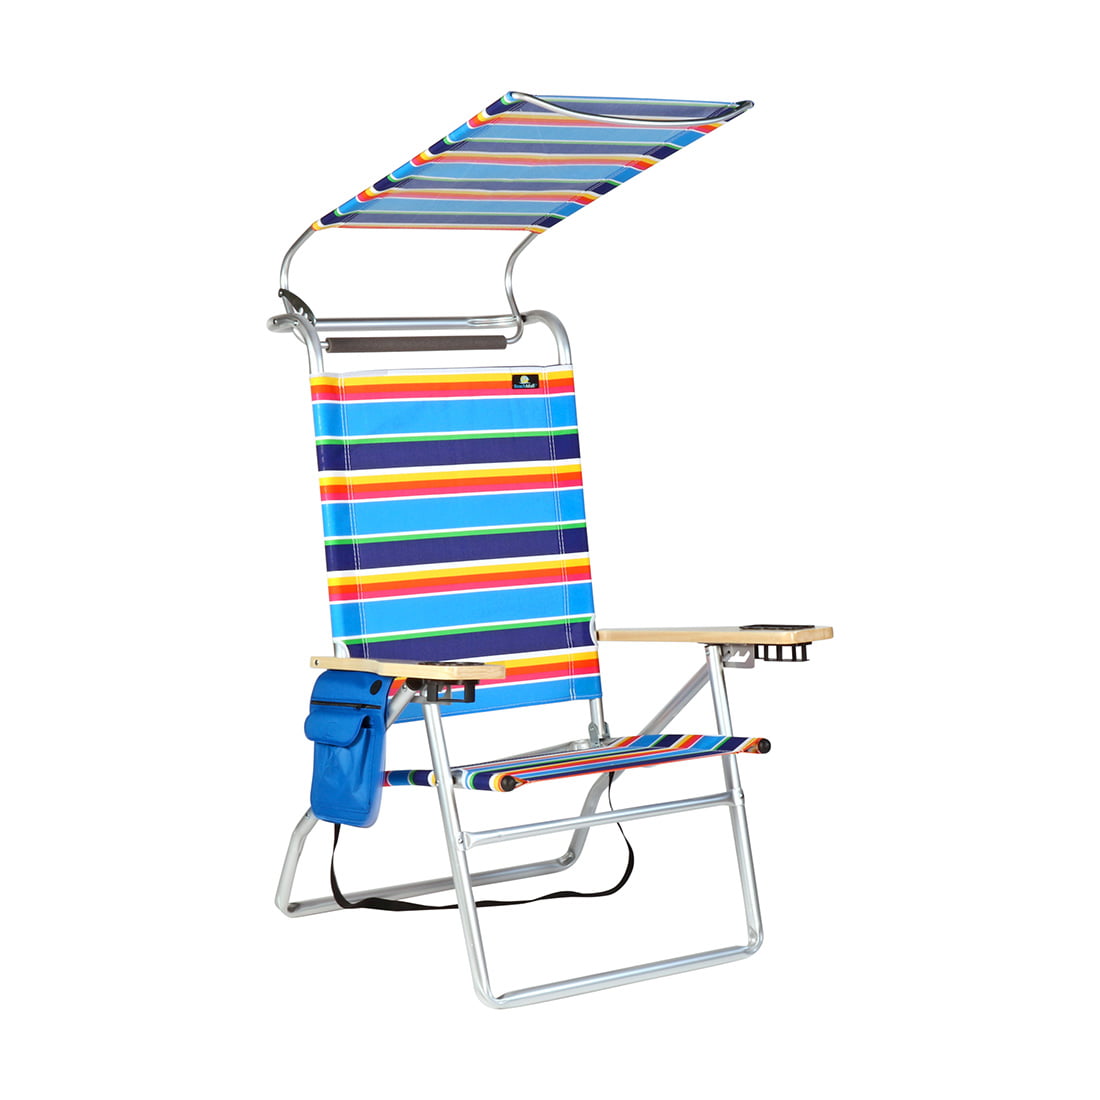 Modern Best Rated Beach Chair With Canopy for Simple Design